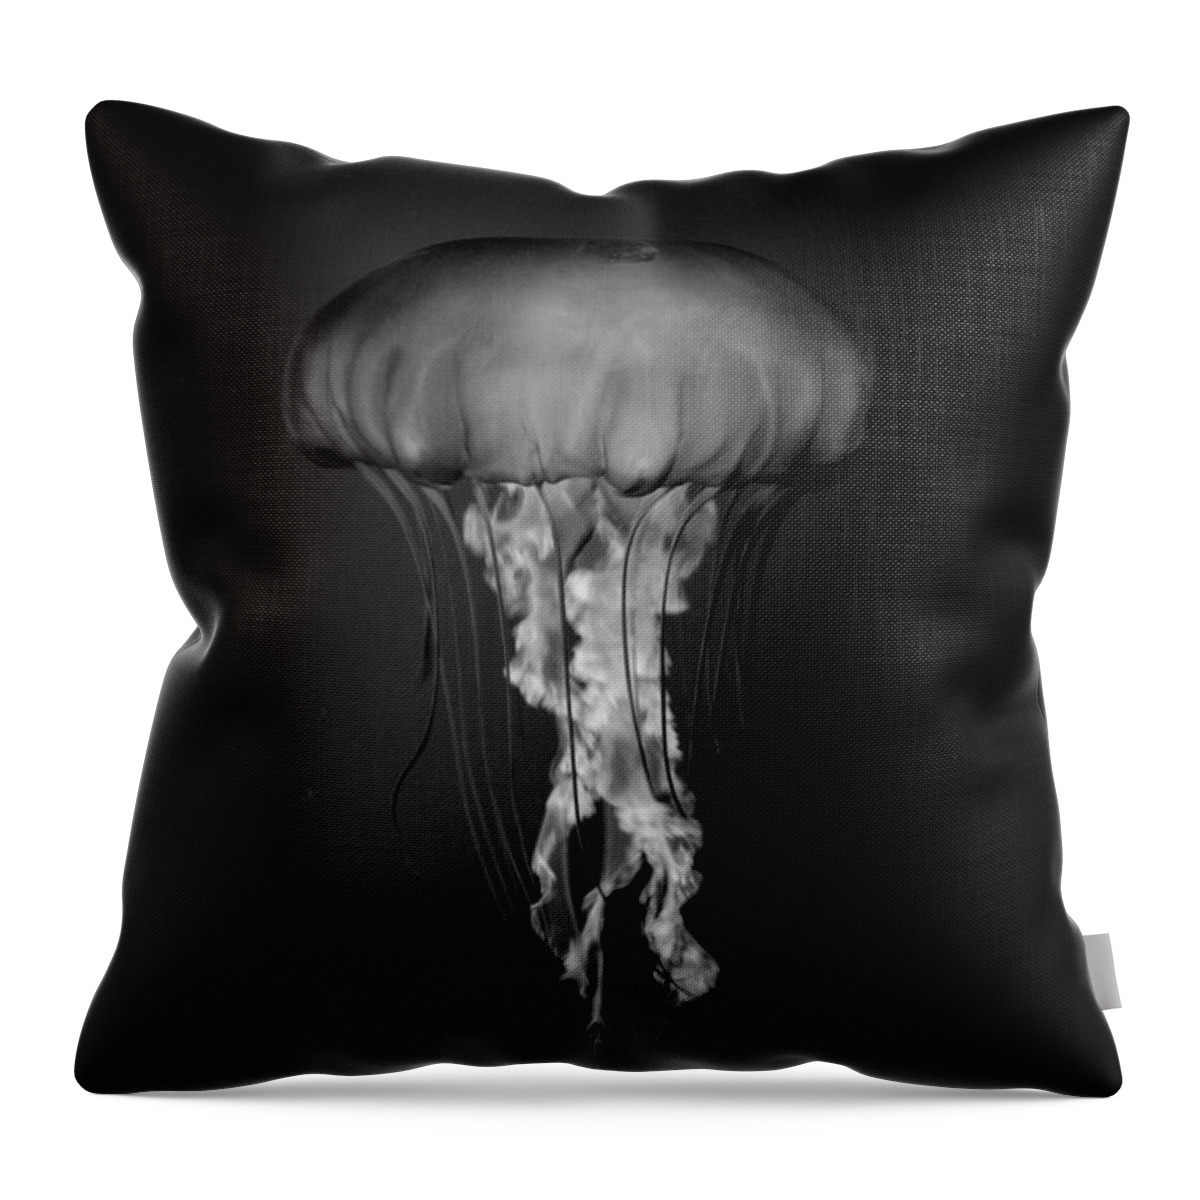 Jelly Throw Pillow featuring the photograph Jelly Fish by Nathan Abbott